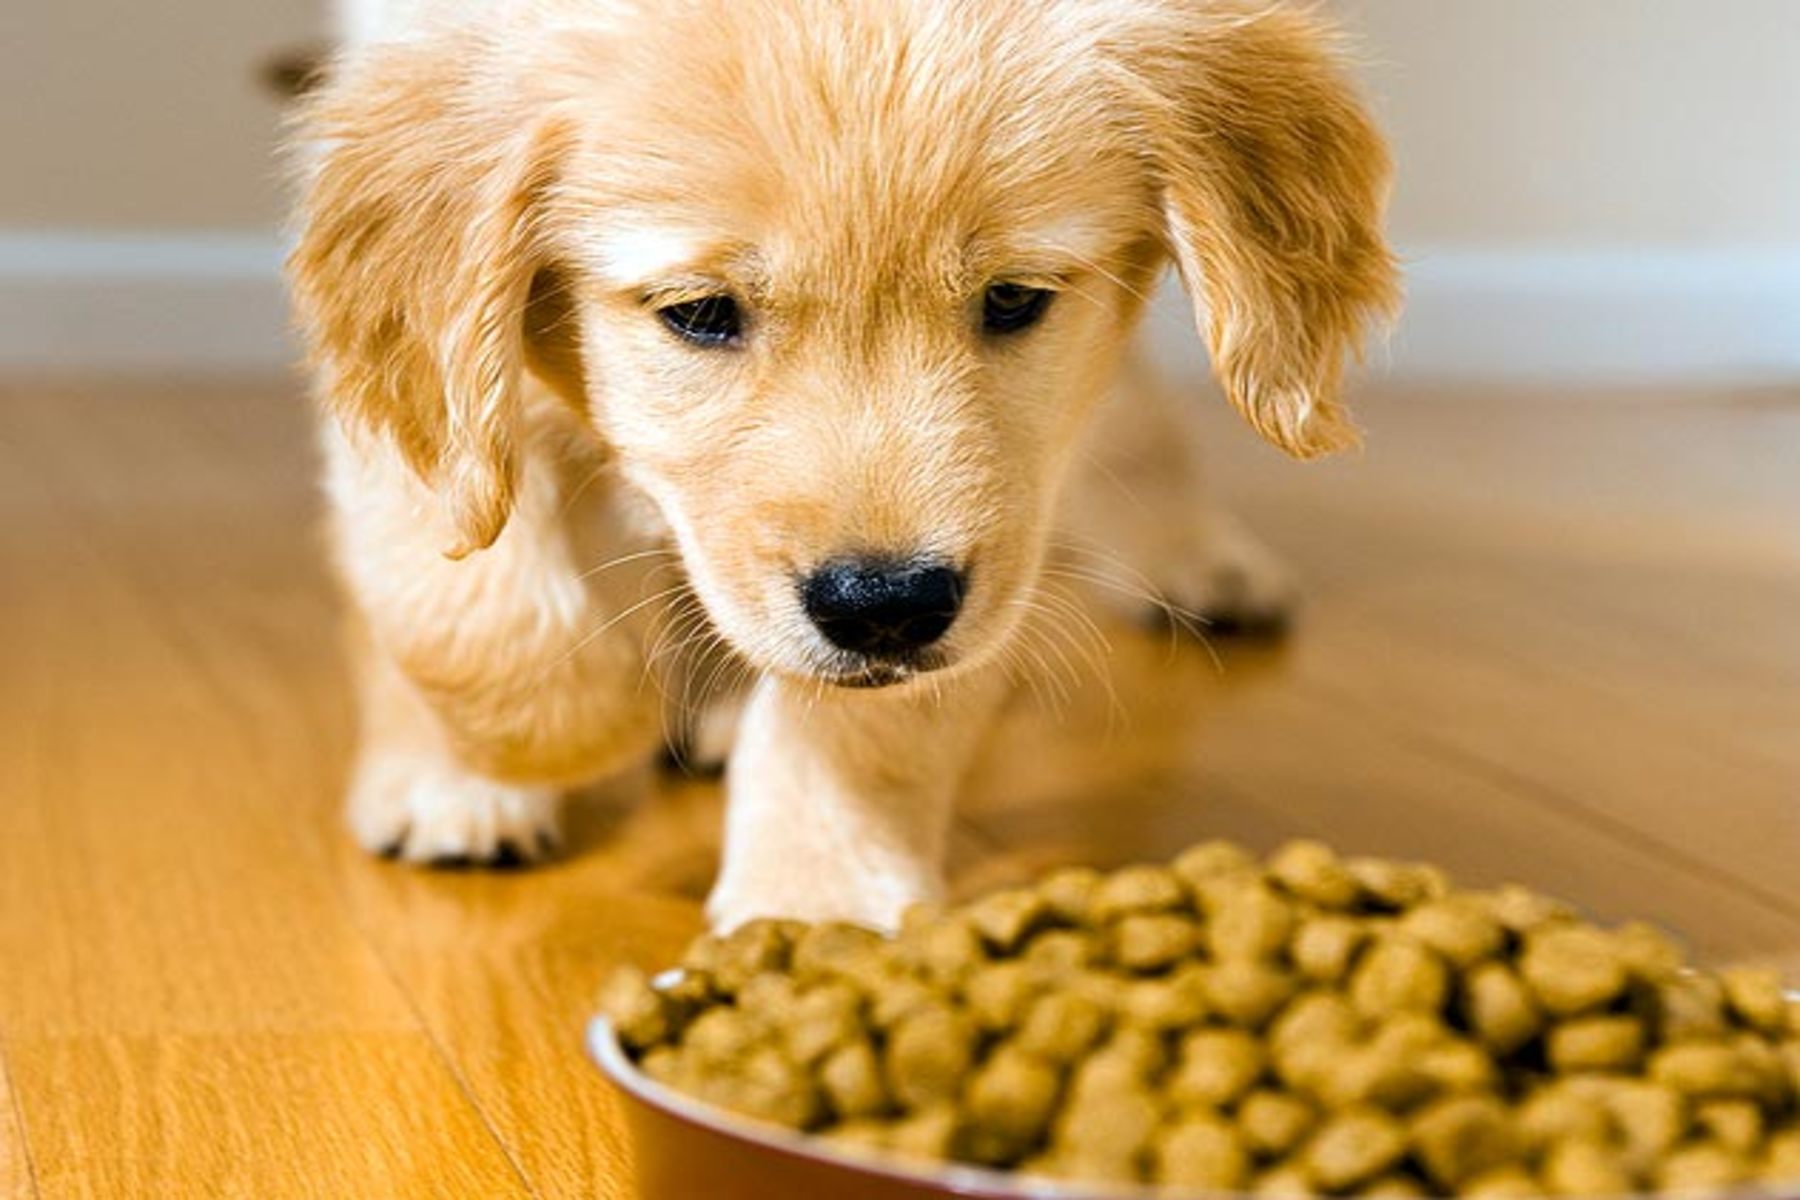 Foods that are bad for dogs